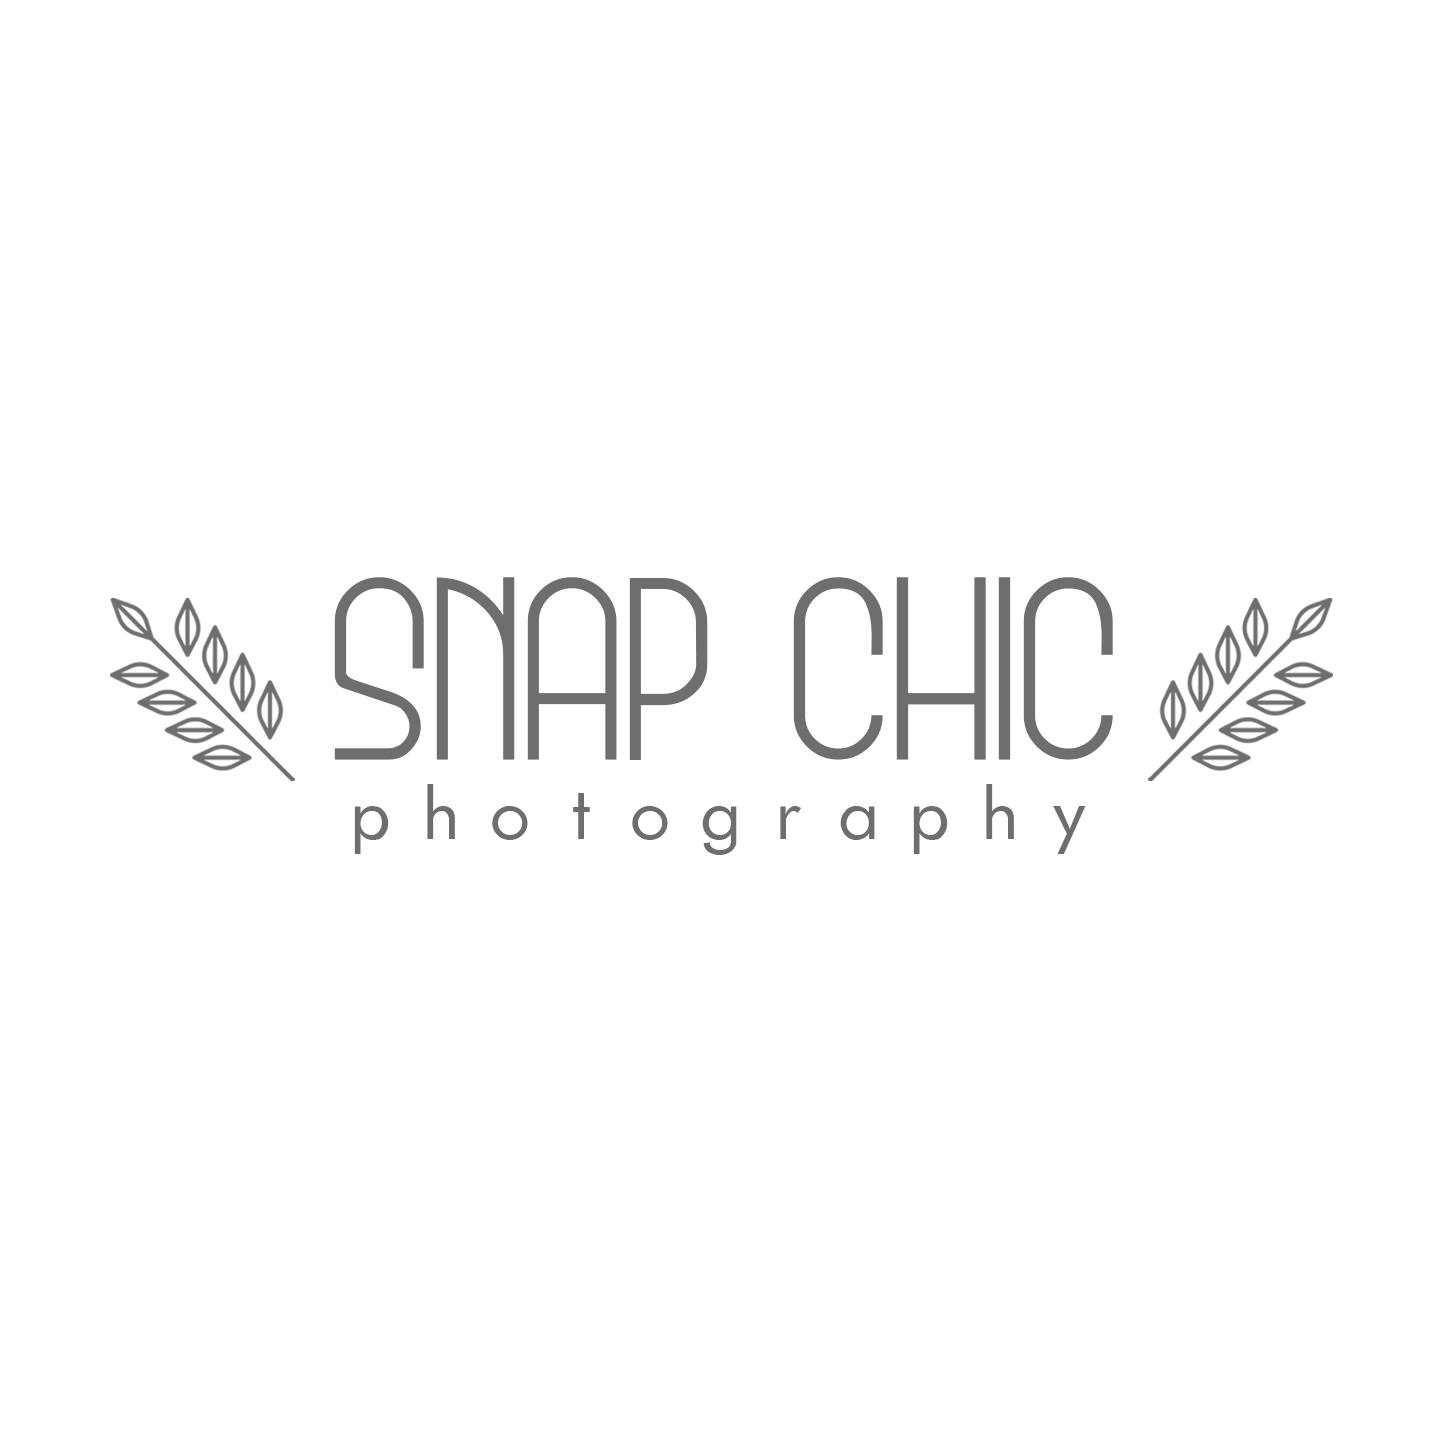 Business logo of Snap Chic Photography